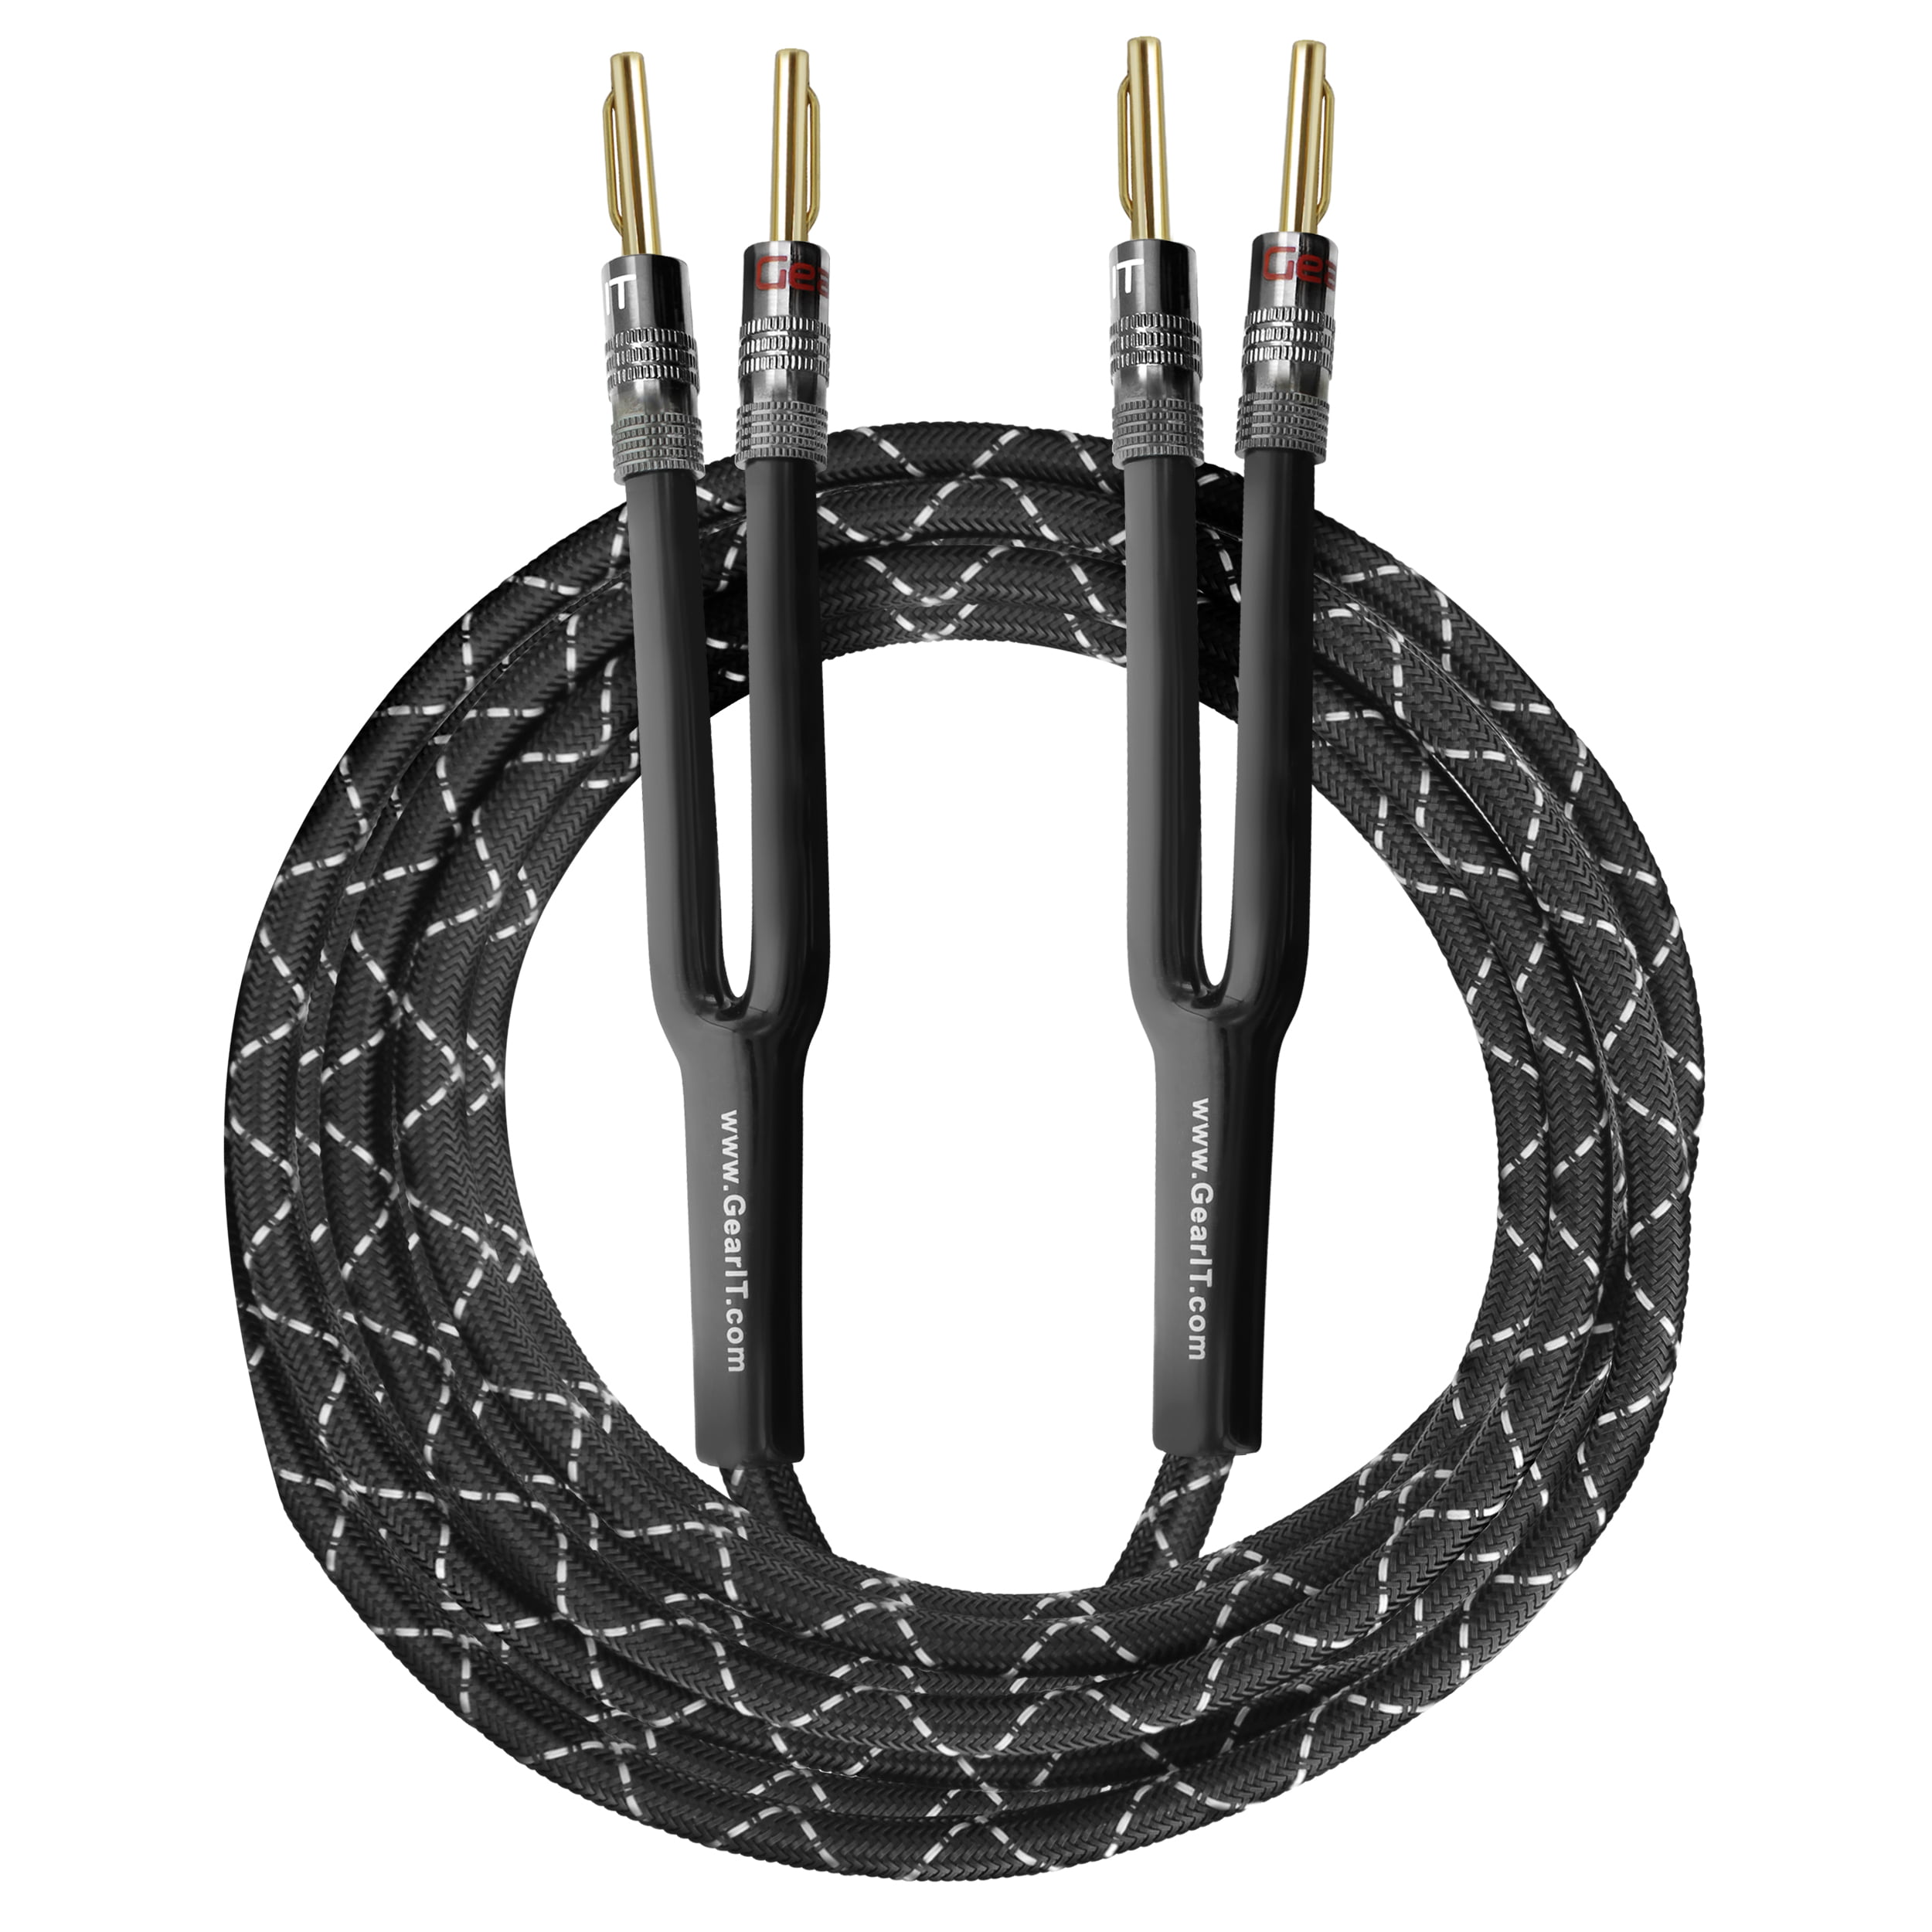 with Dual Gold Plated Banana Plug Tips OFC Black Construction Oxygen-Free Copper GearIT 12AWG Premium Heavy Duty Braided Speaker Wire 15 Feet